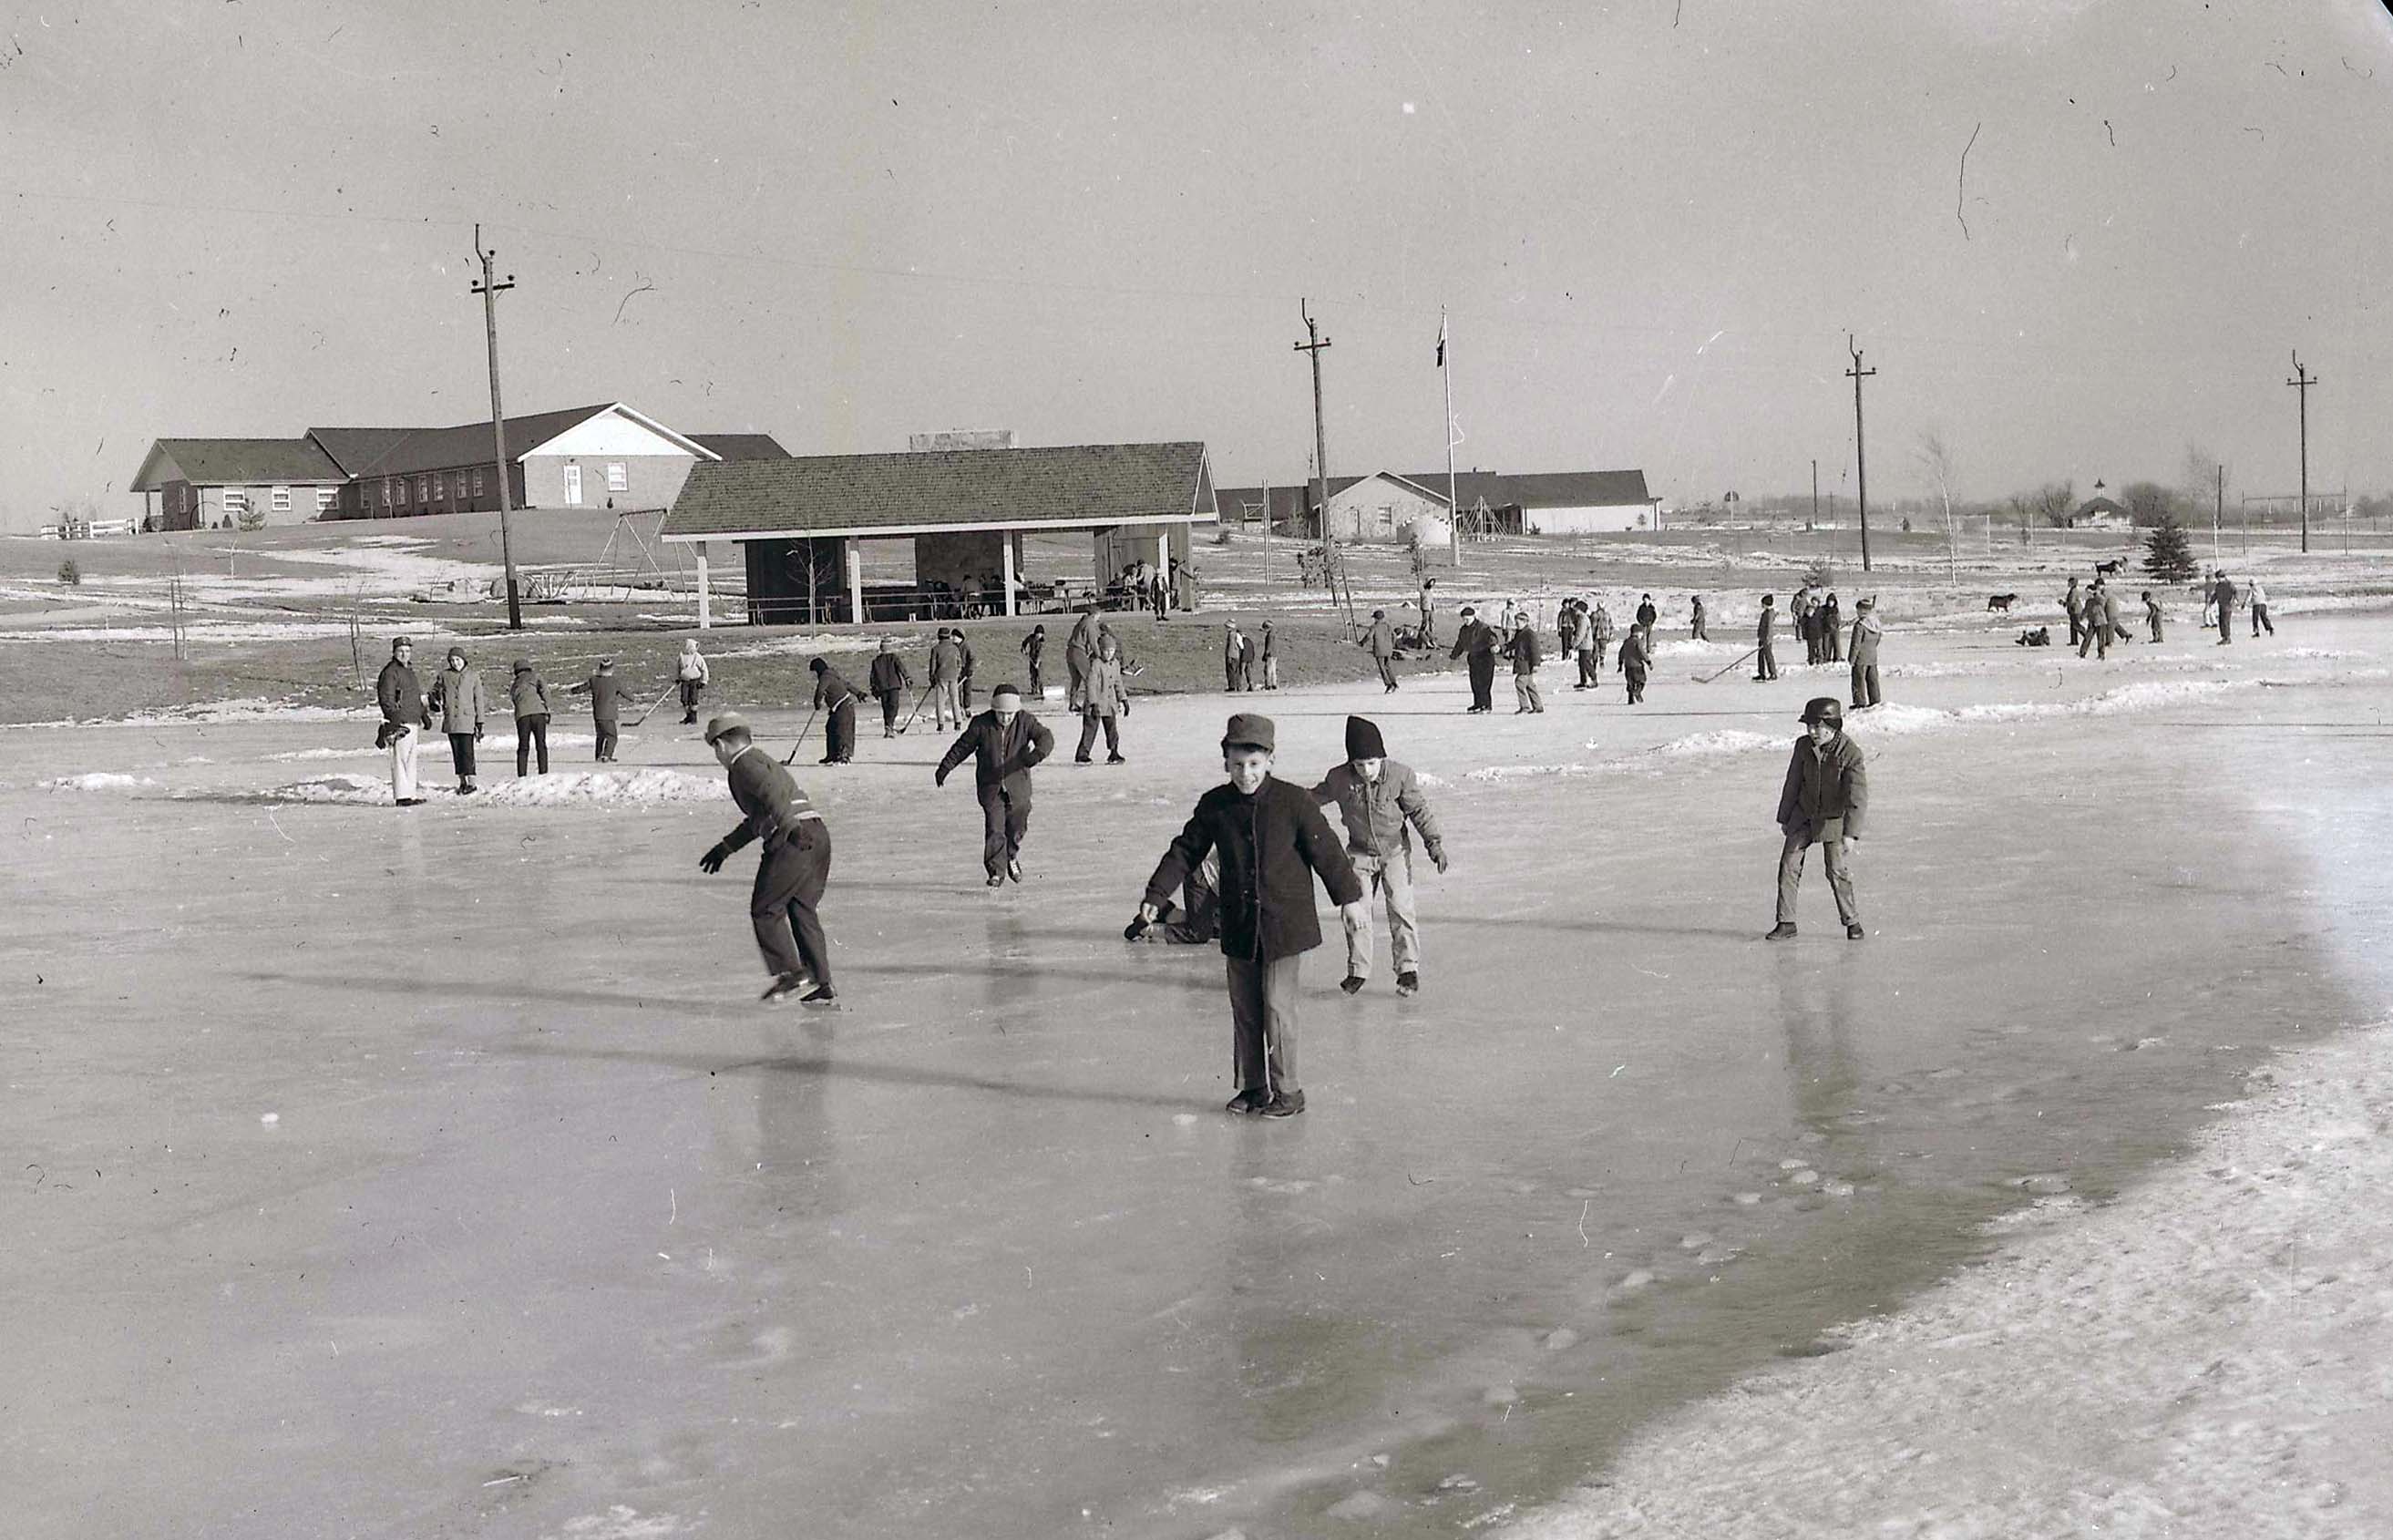 Ice skating at MHS in the 1960s